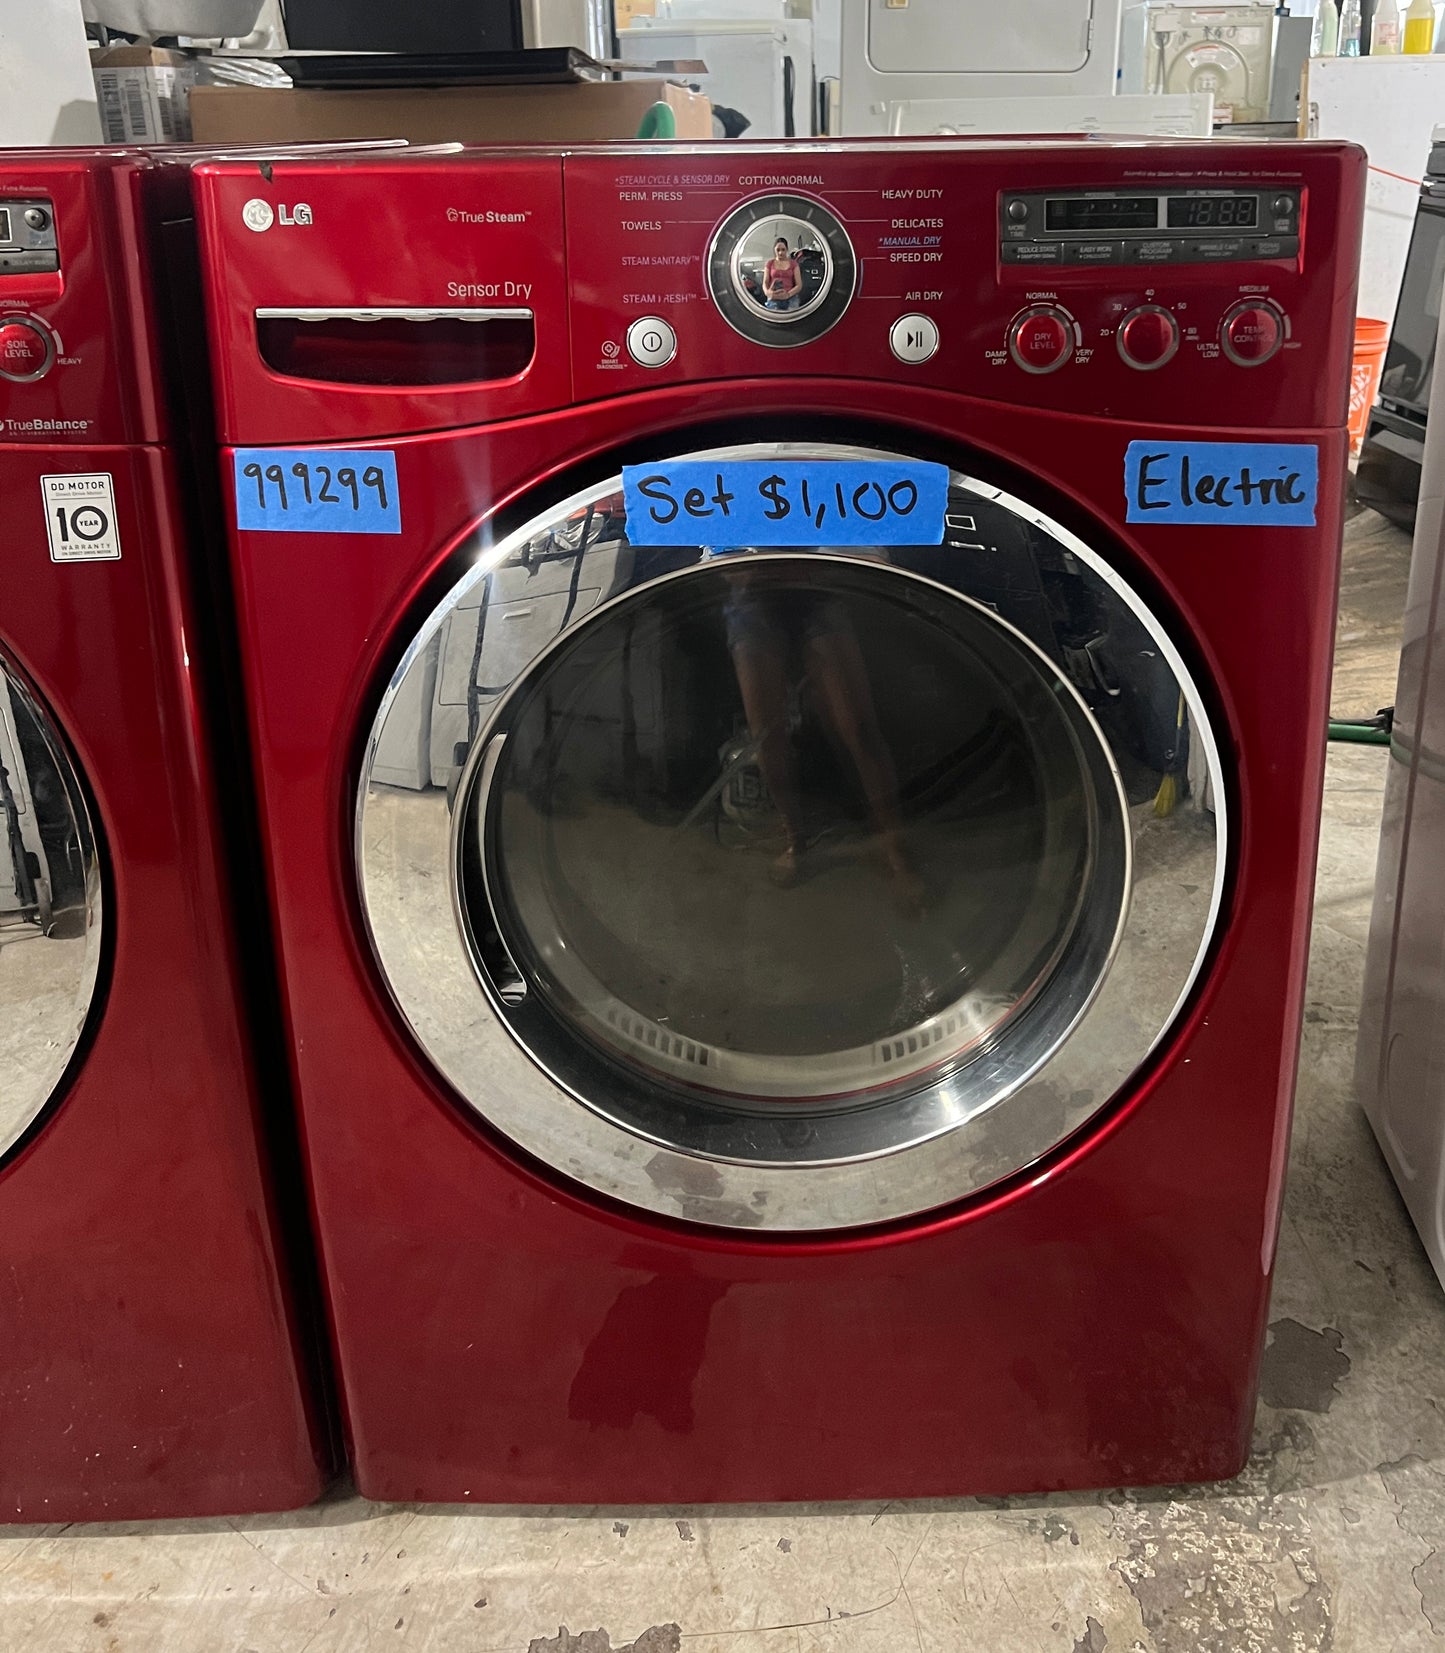 LG Front Load Washer & Electric Dryer set in Red 999299 DLEX2650R, WM2650HRA